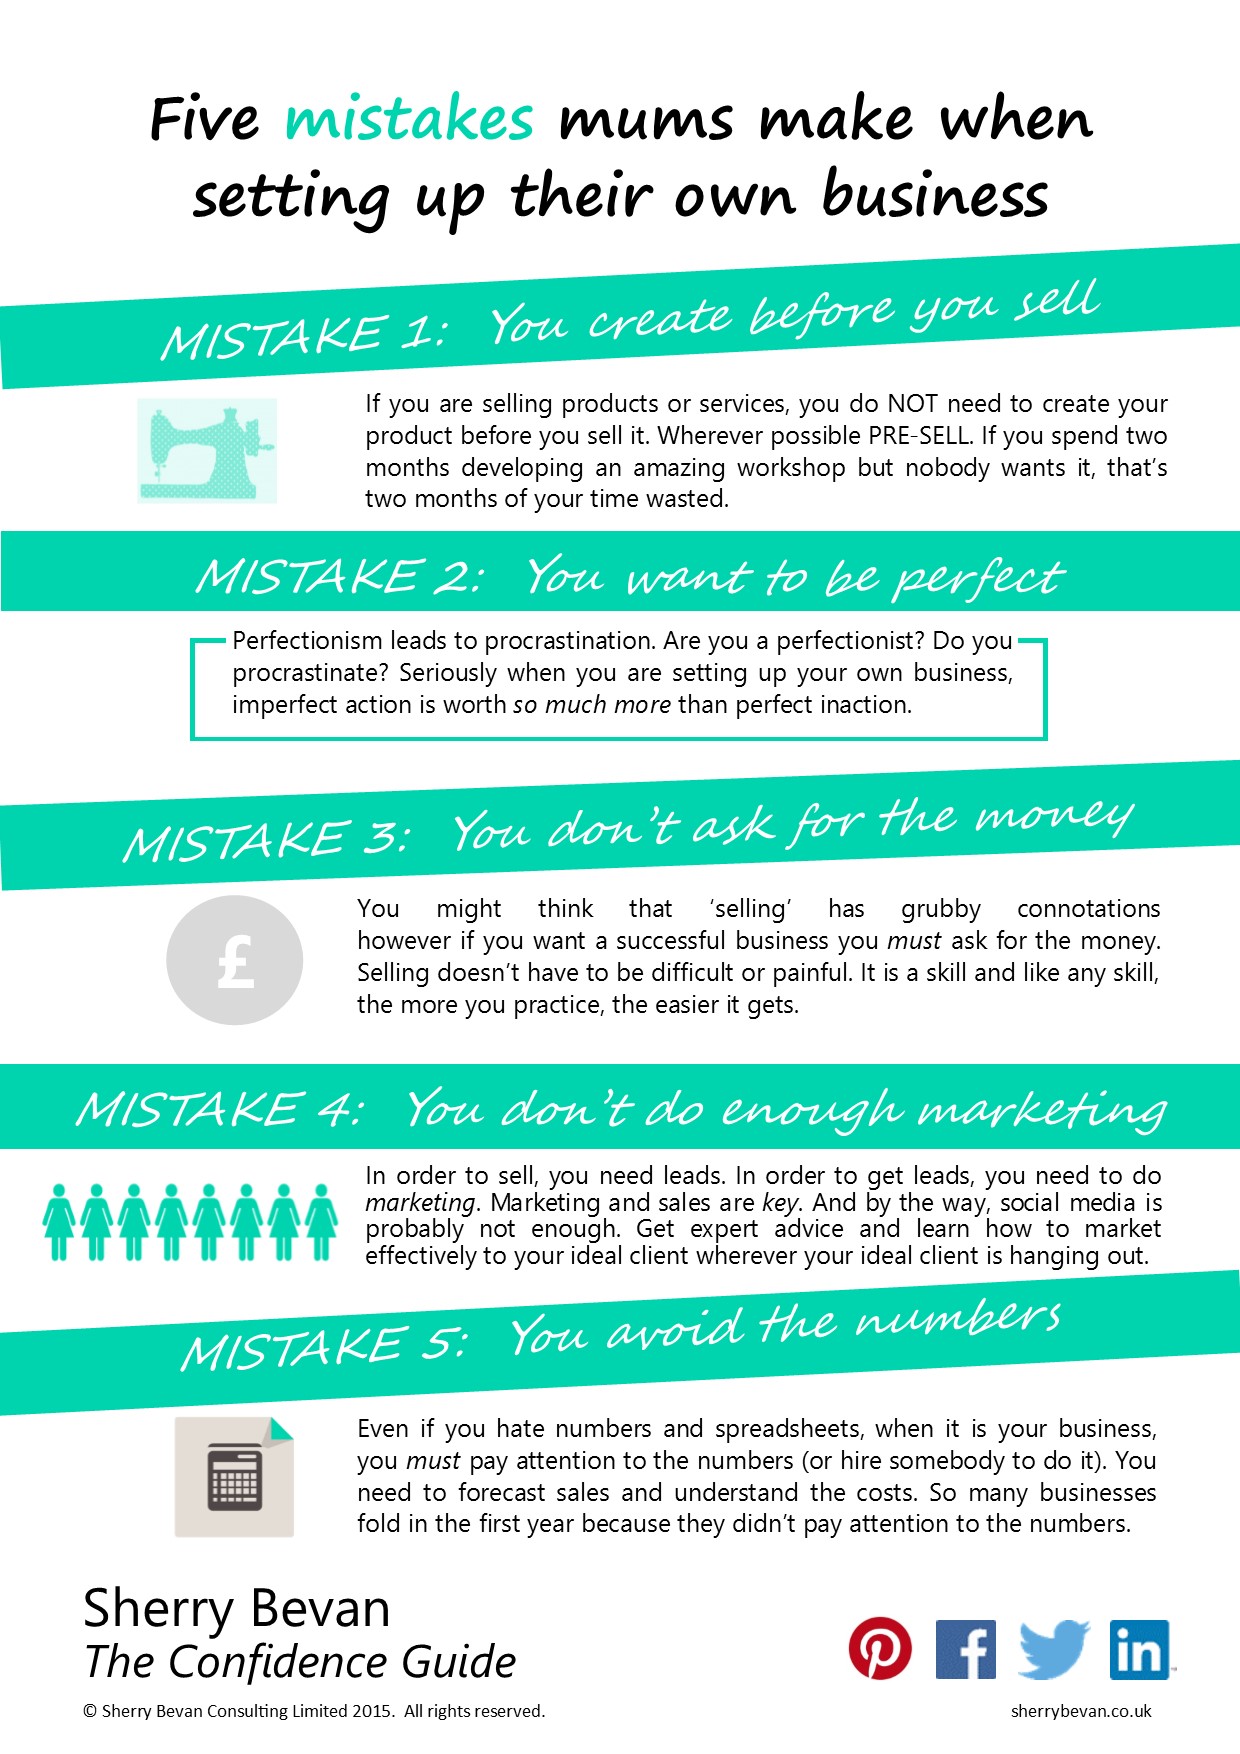 Top 5 mistakes mums make when setting up their own business INFOGRAPHIC